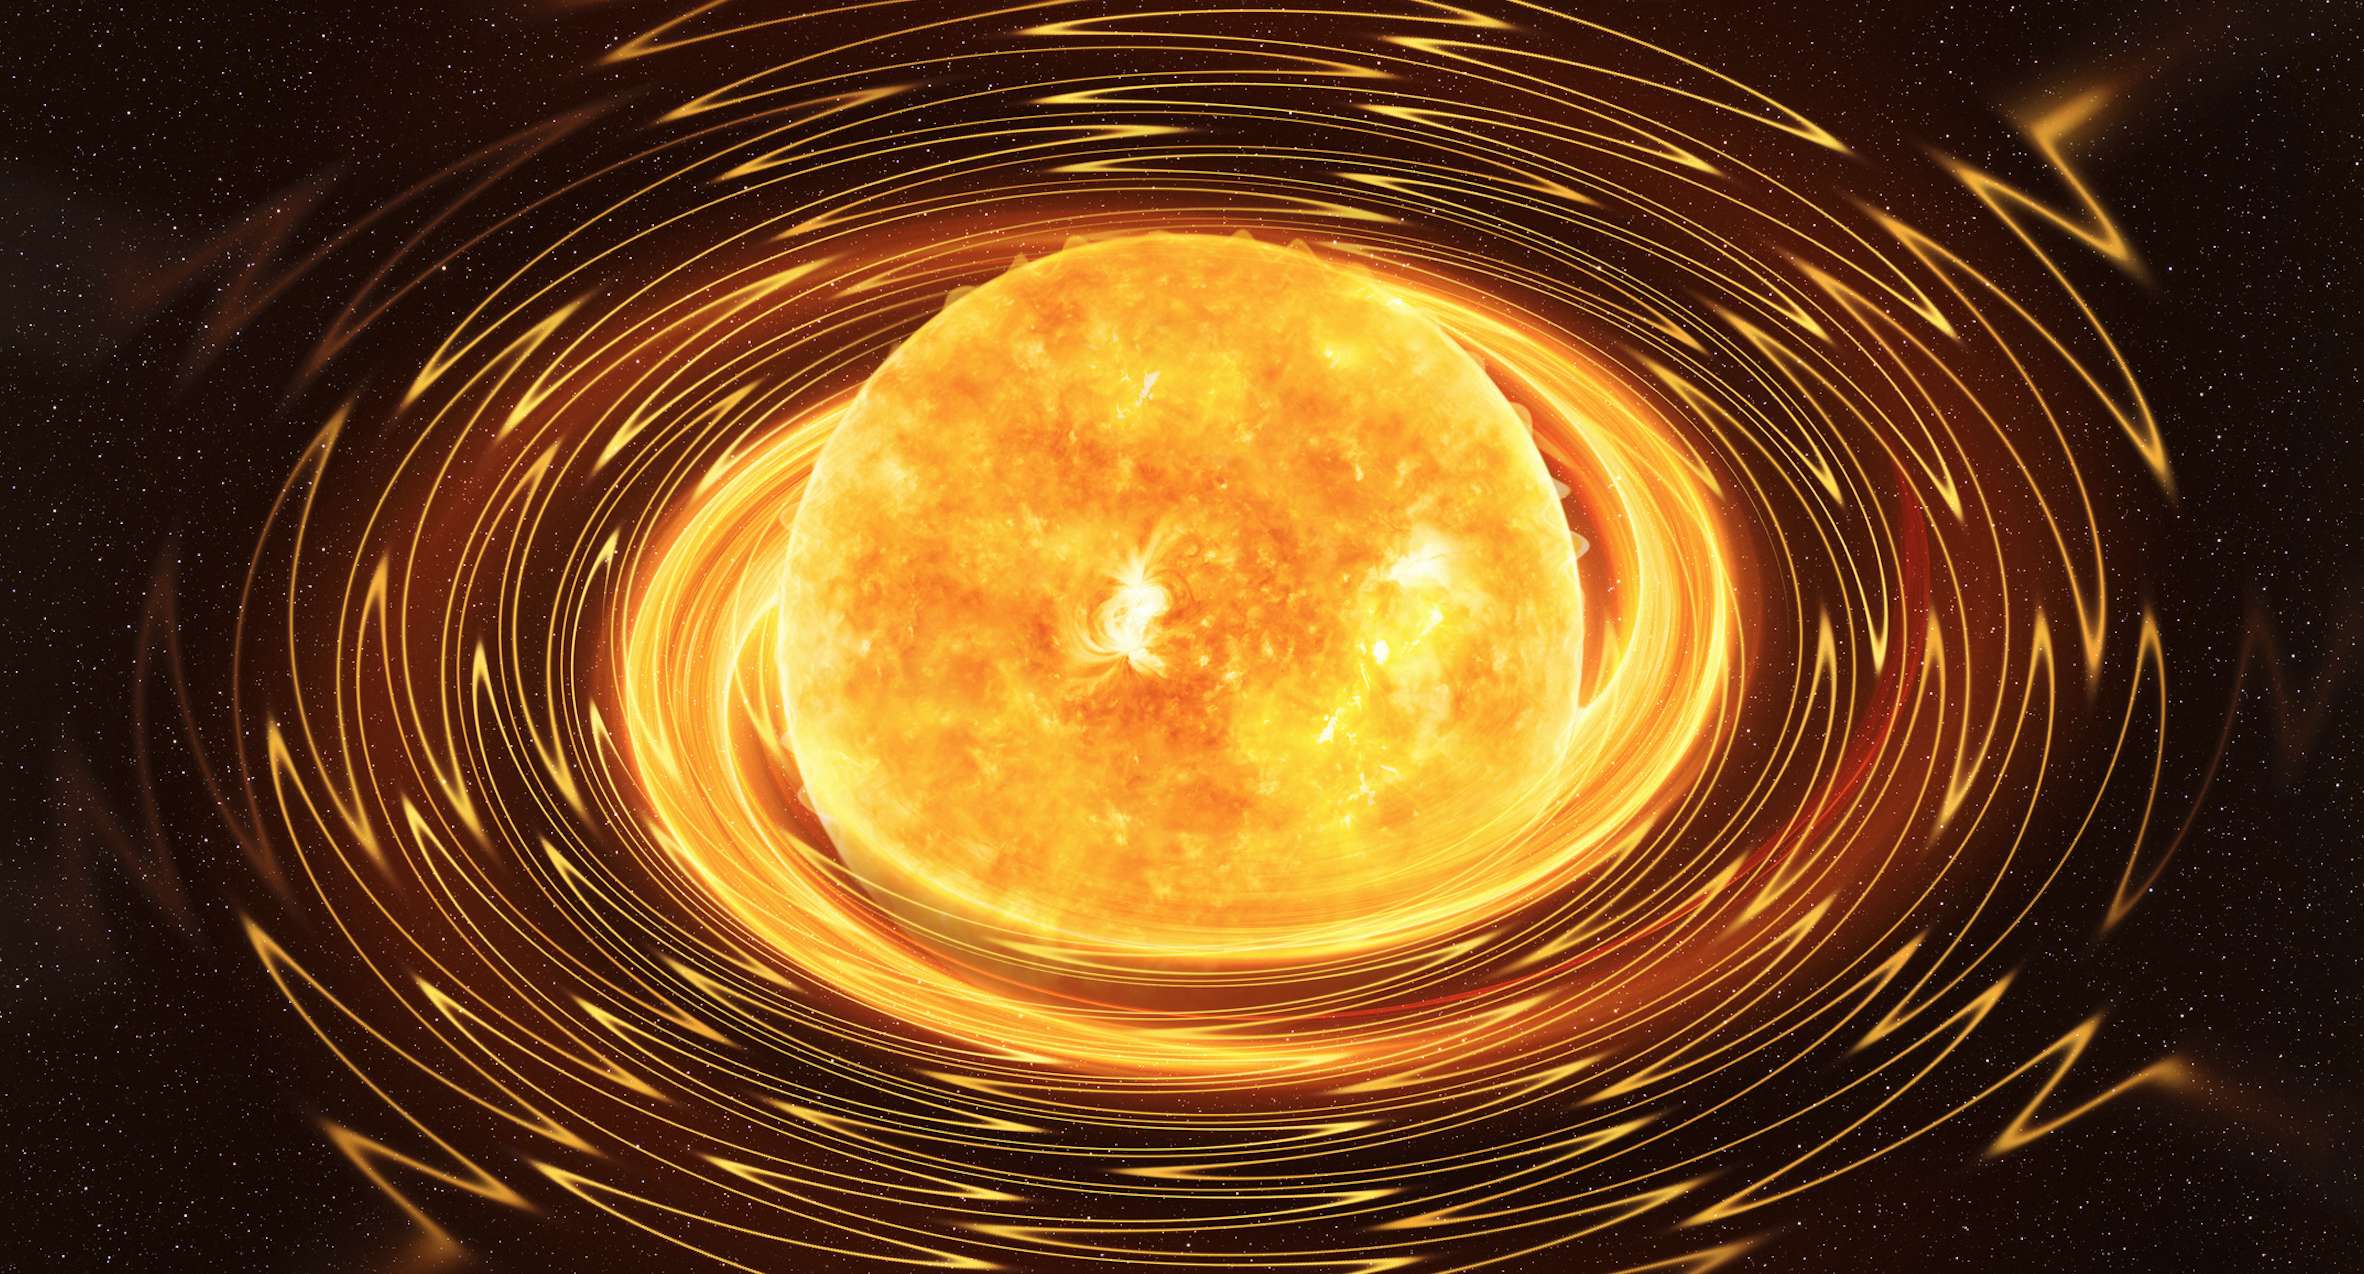 The youngest magnetar ever discovered found spinning 16,000 light